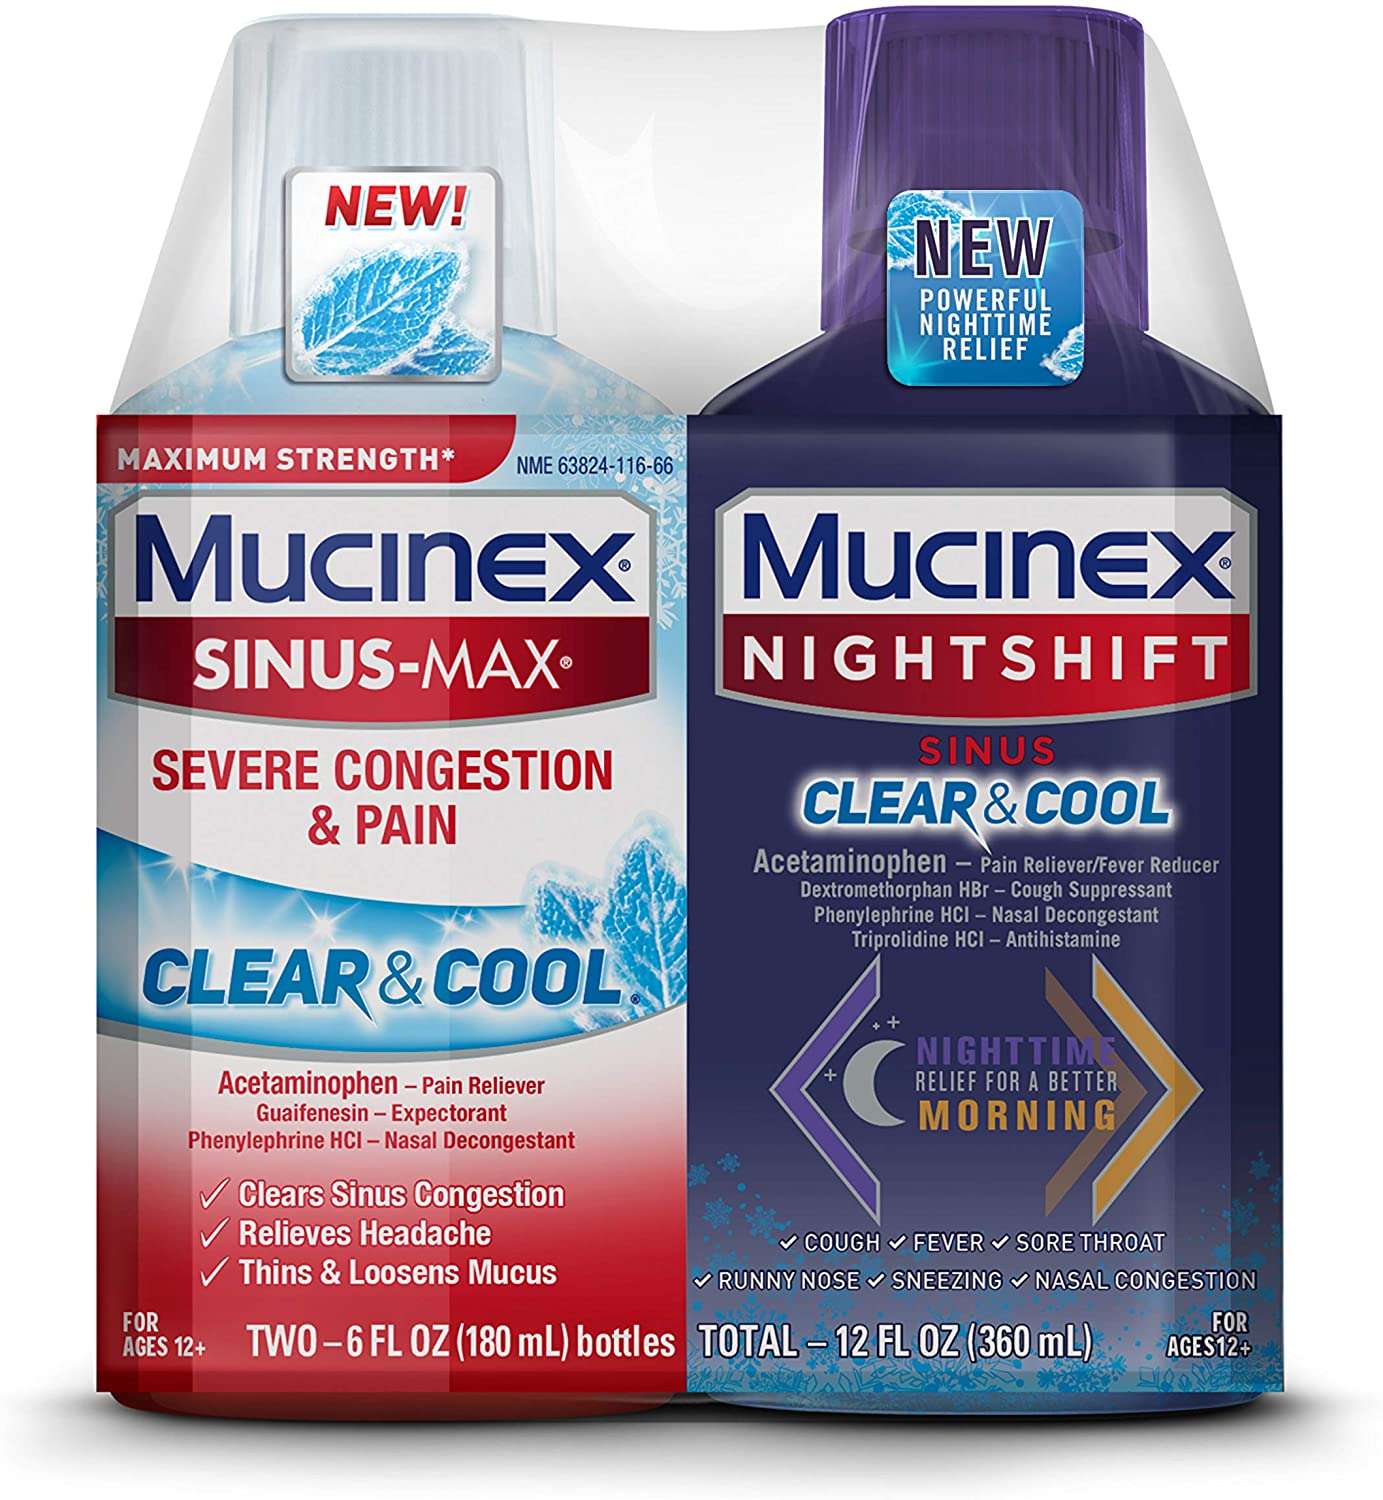 30% off Mucinex Cold and Flu Relief